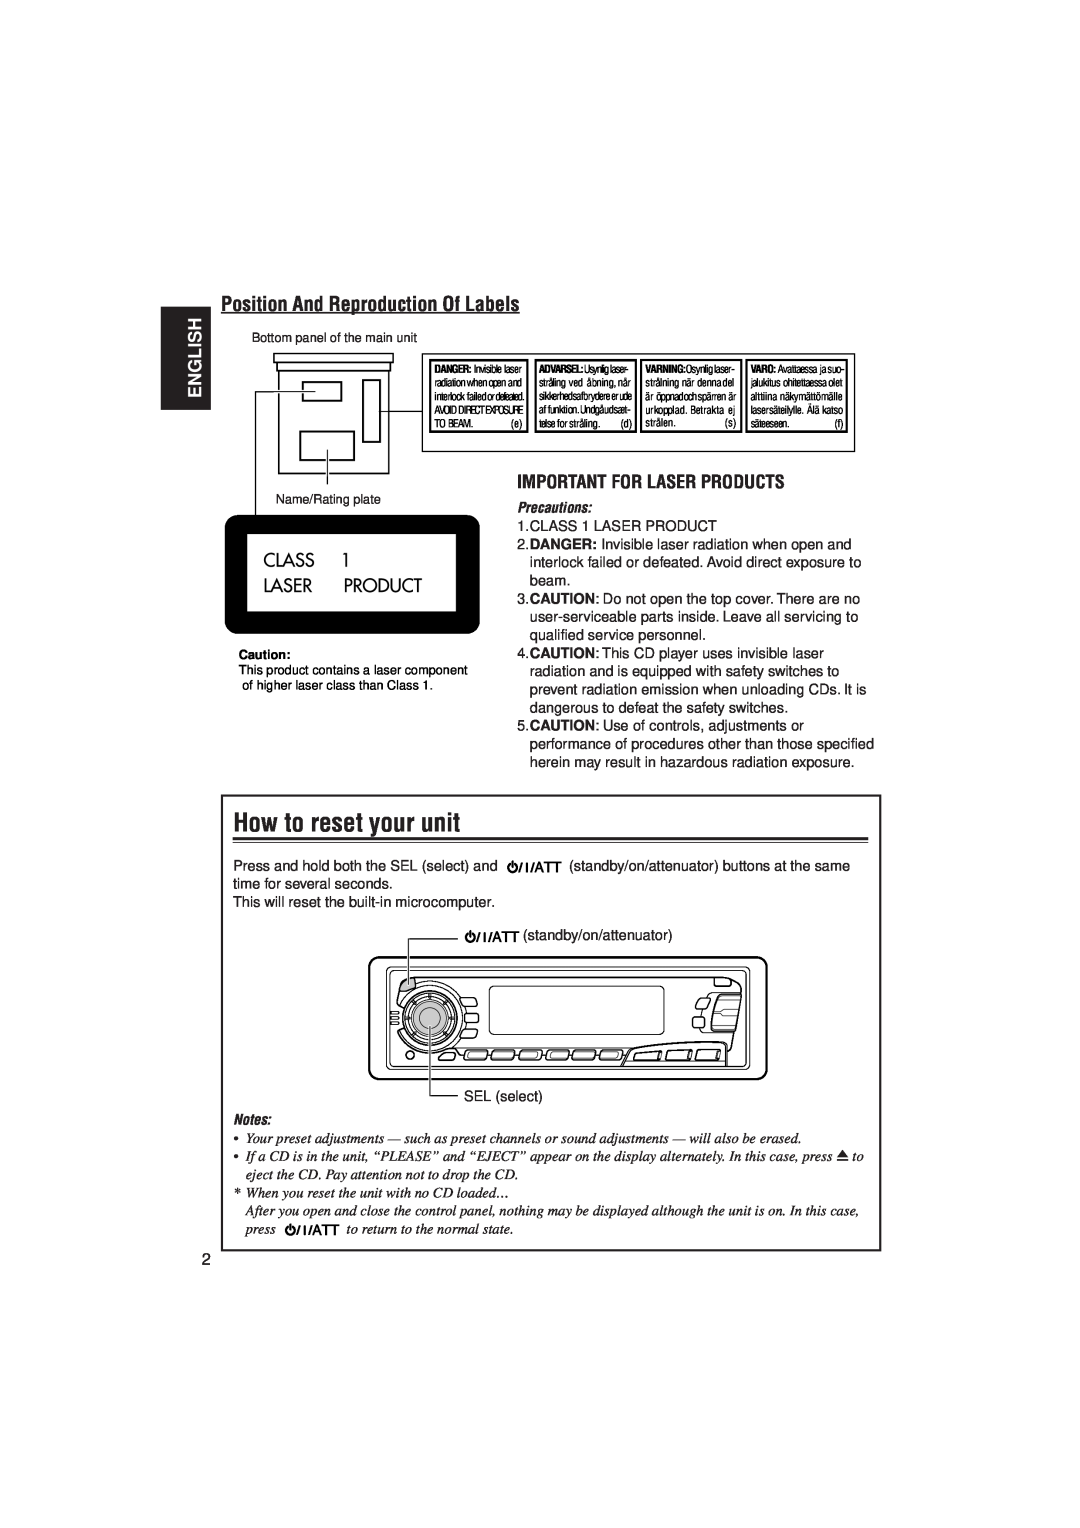 JVC KD-S9R How to reset your unit, Position And Reproduction Of Labels, English, Important For Laser Products, Precautions 